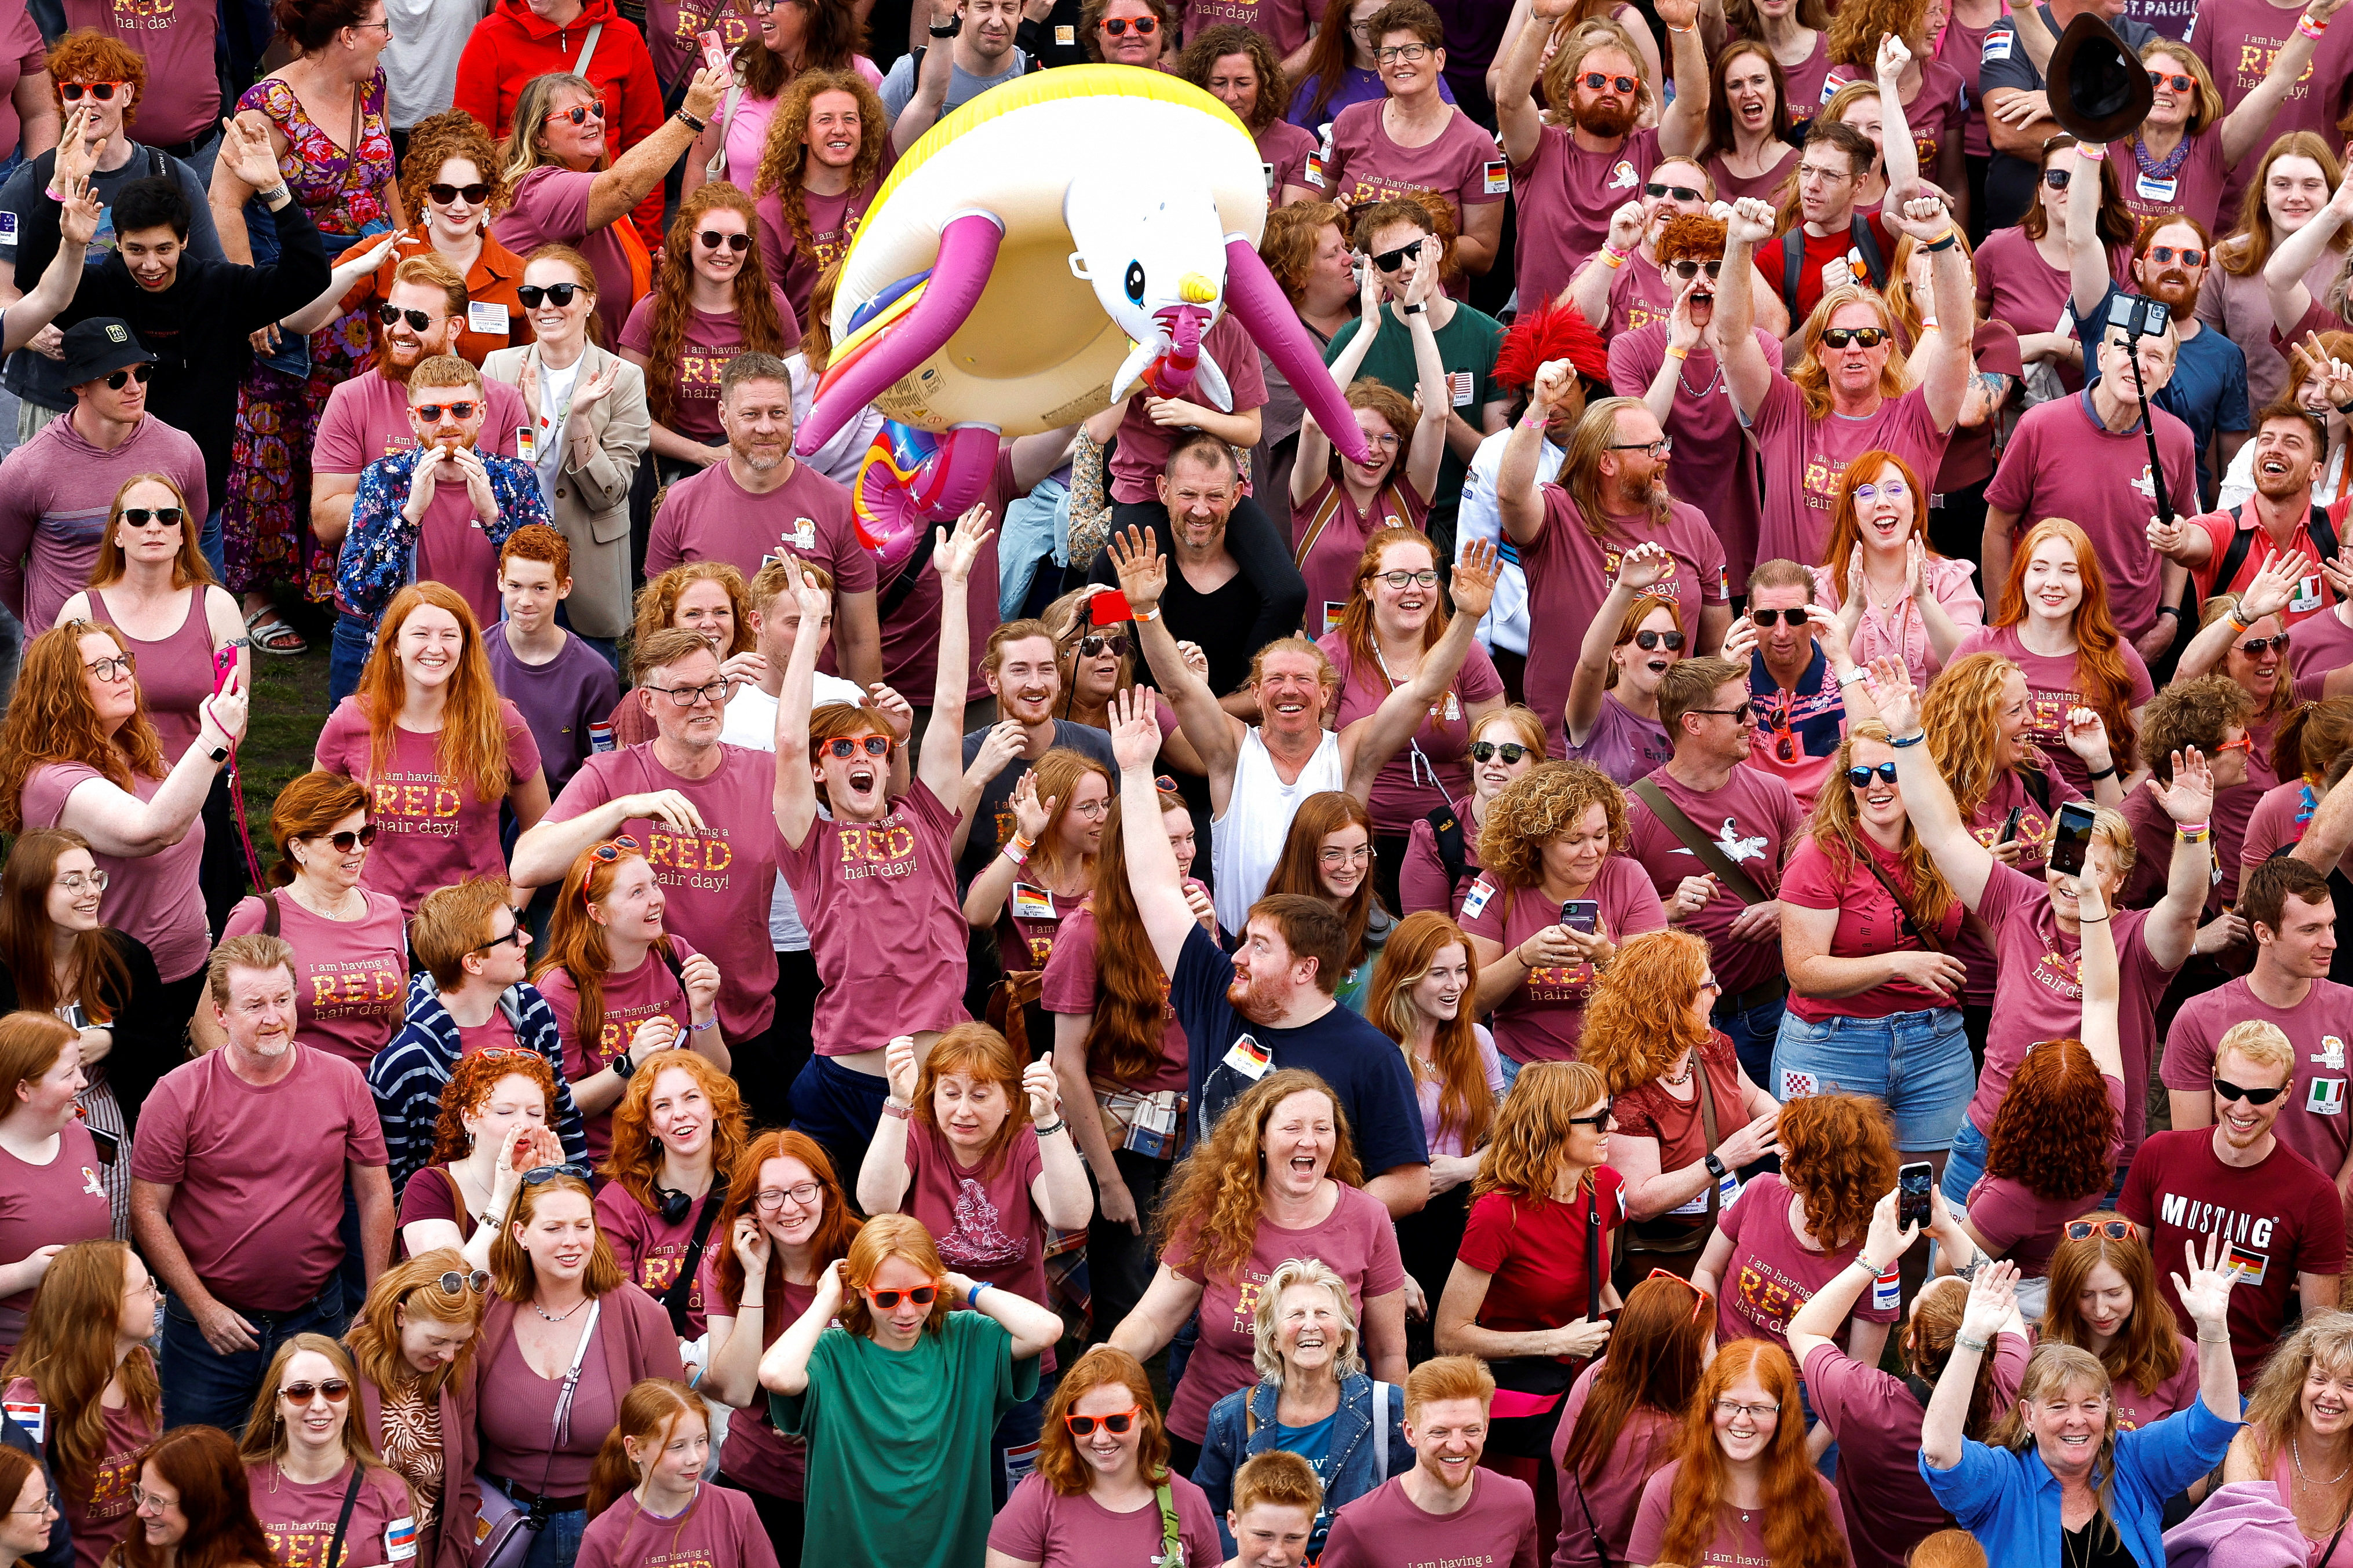 People attend the annual Redhead Days Festival in Tilburg, Netherlands on Sunday. Photo: Reuters 